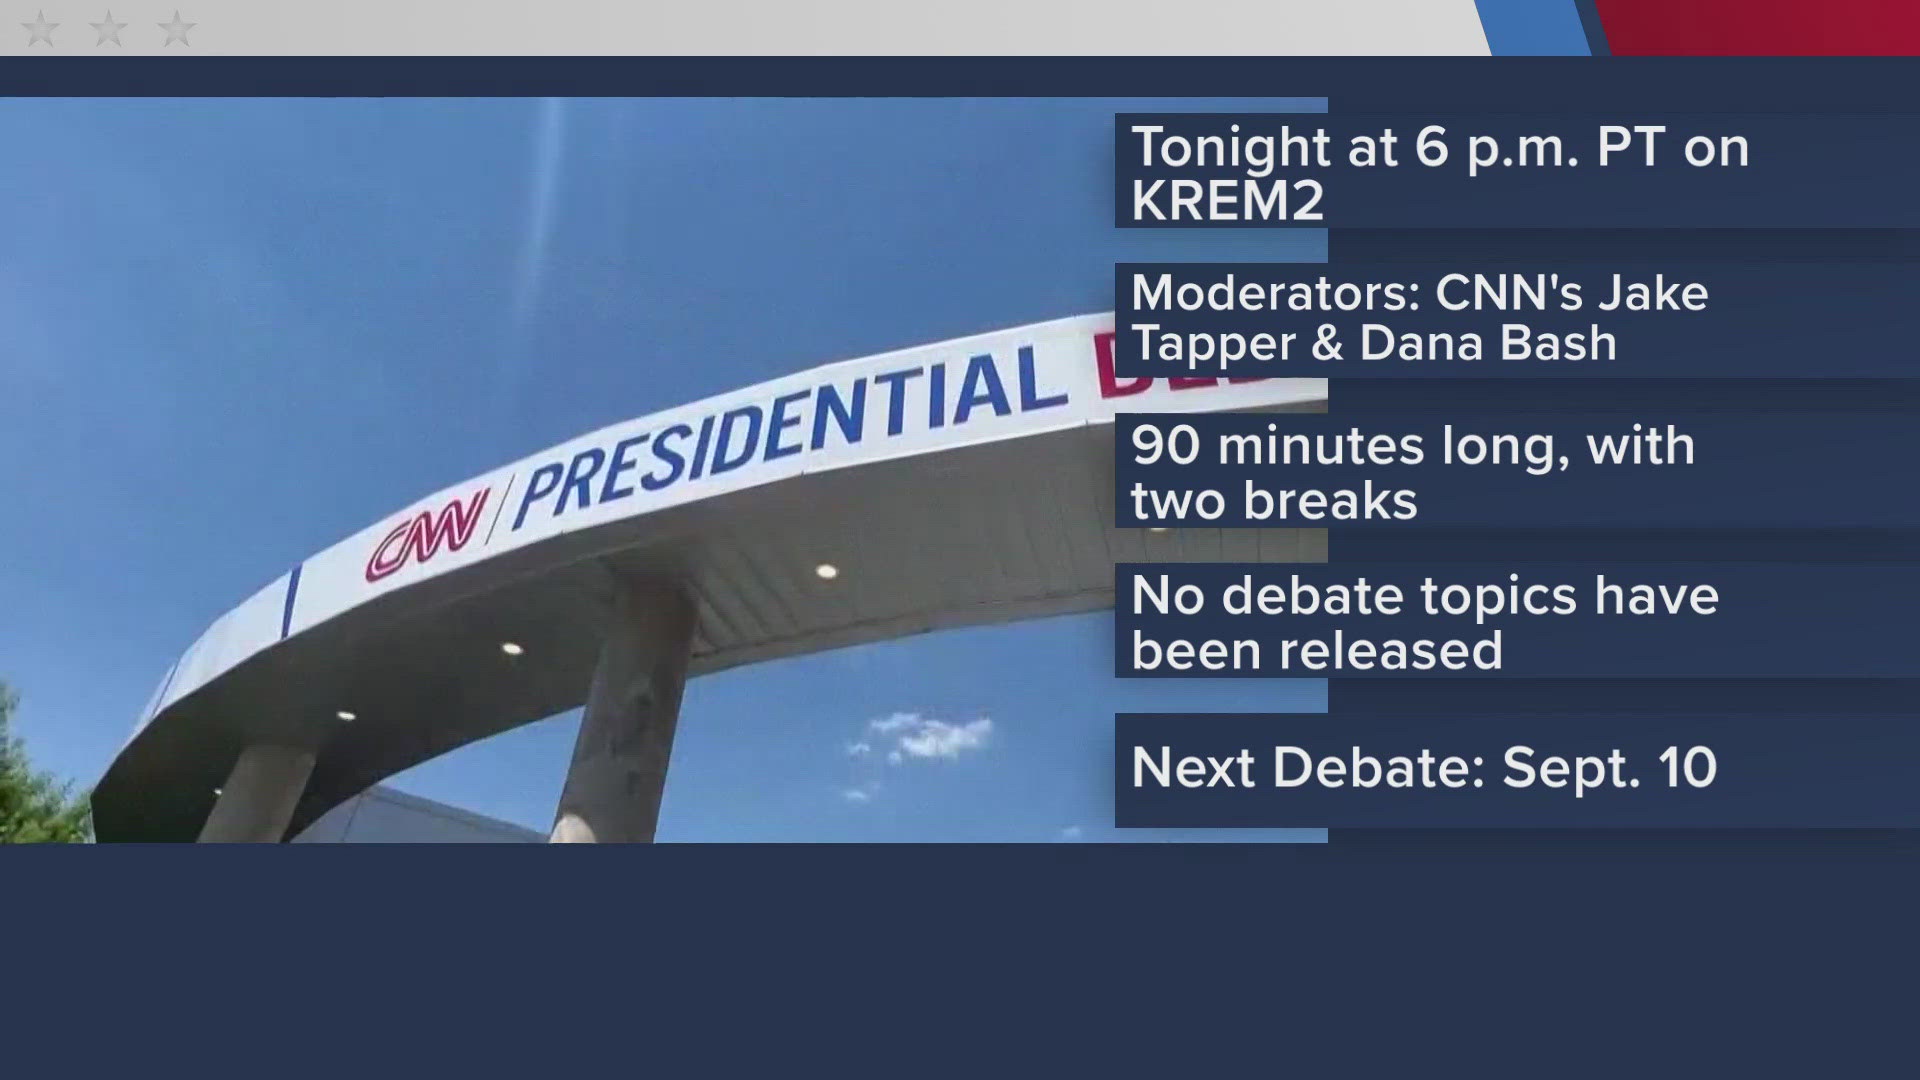 Thursday’s debate is the first of two the candidates have agreed to. The debate begins at 6 p.m. and can be watched right here on KREM 2.